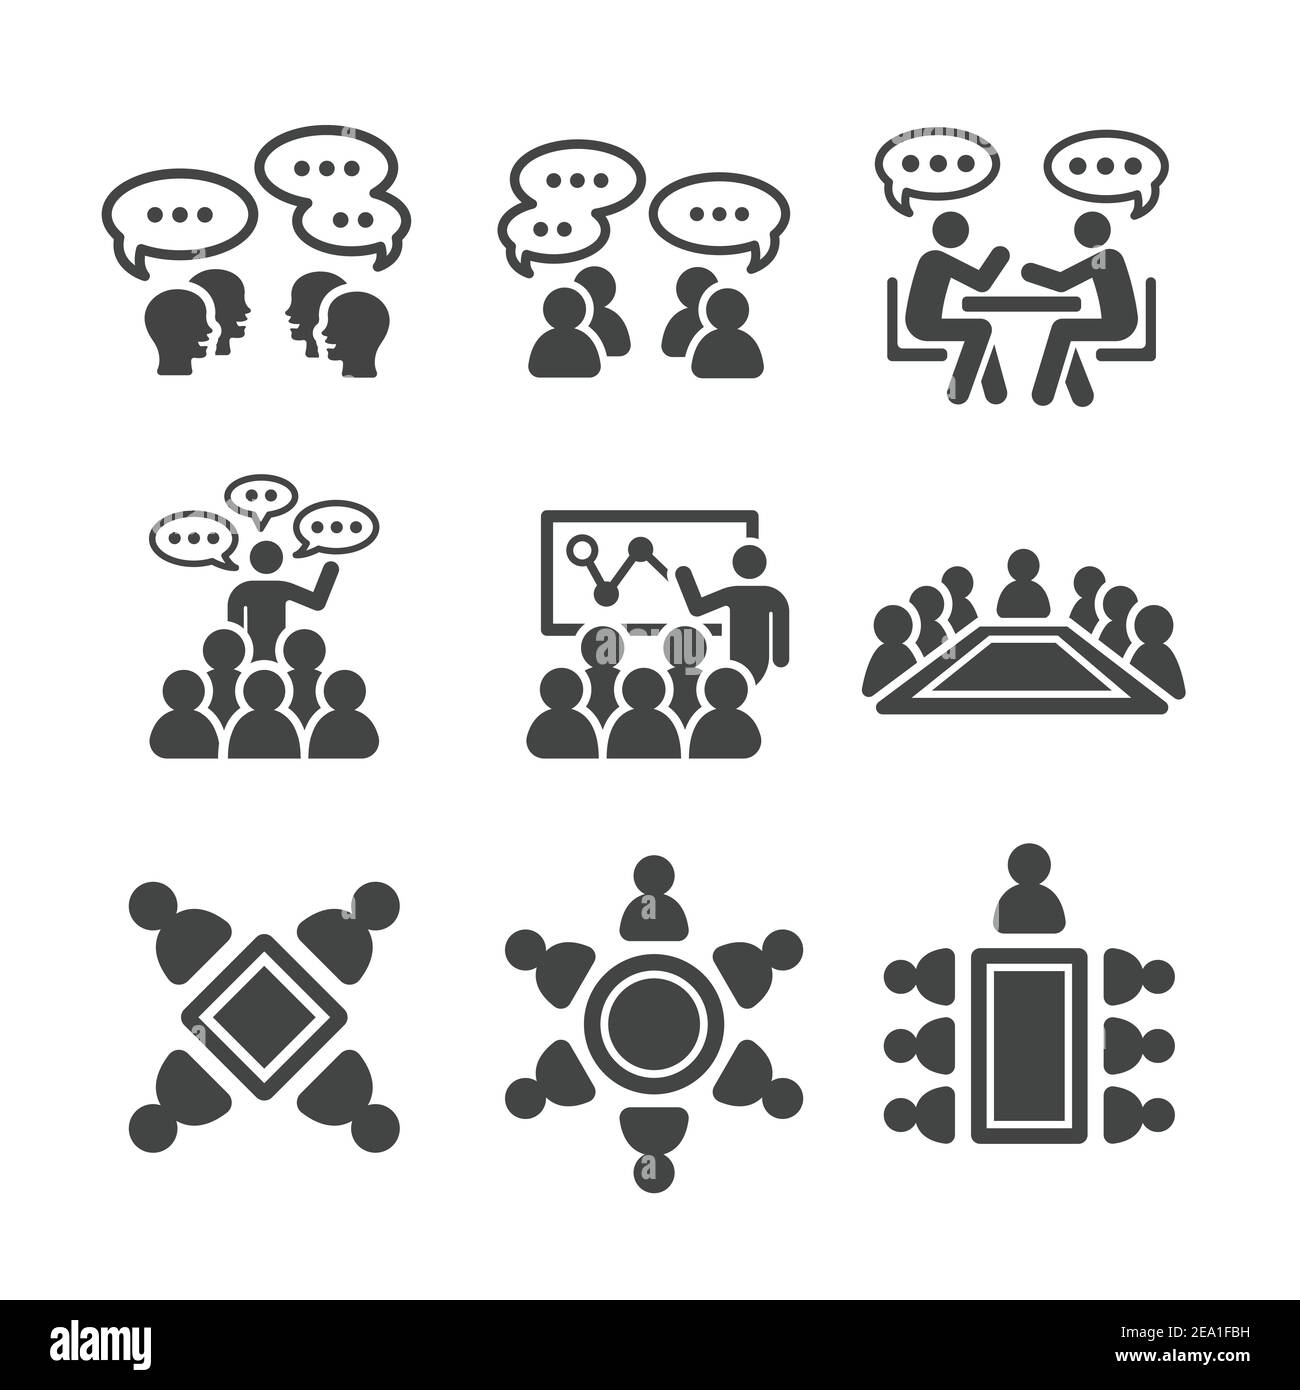 conference icon Stock Vector